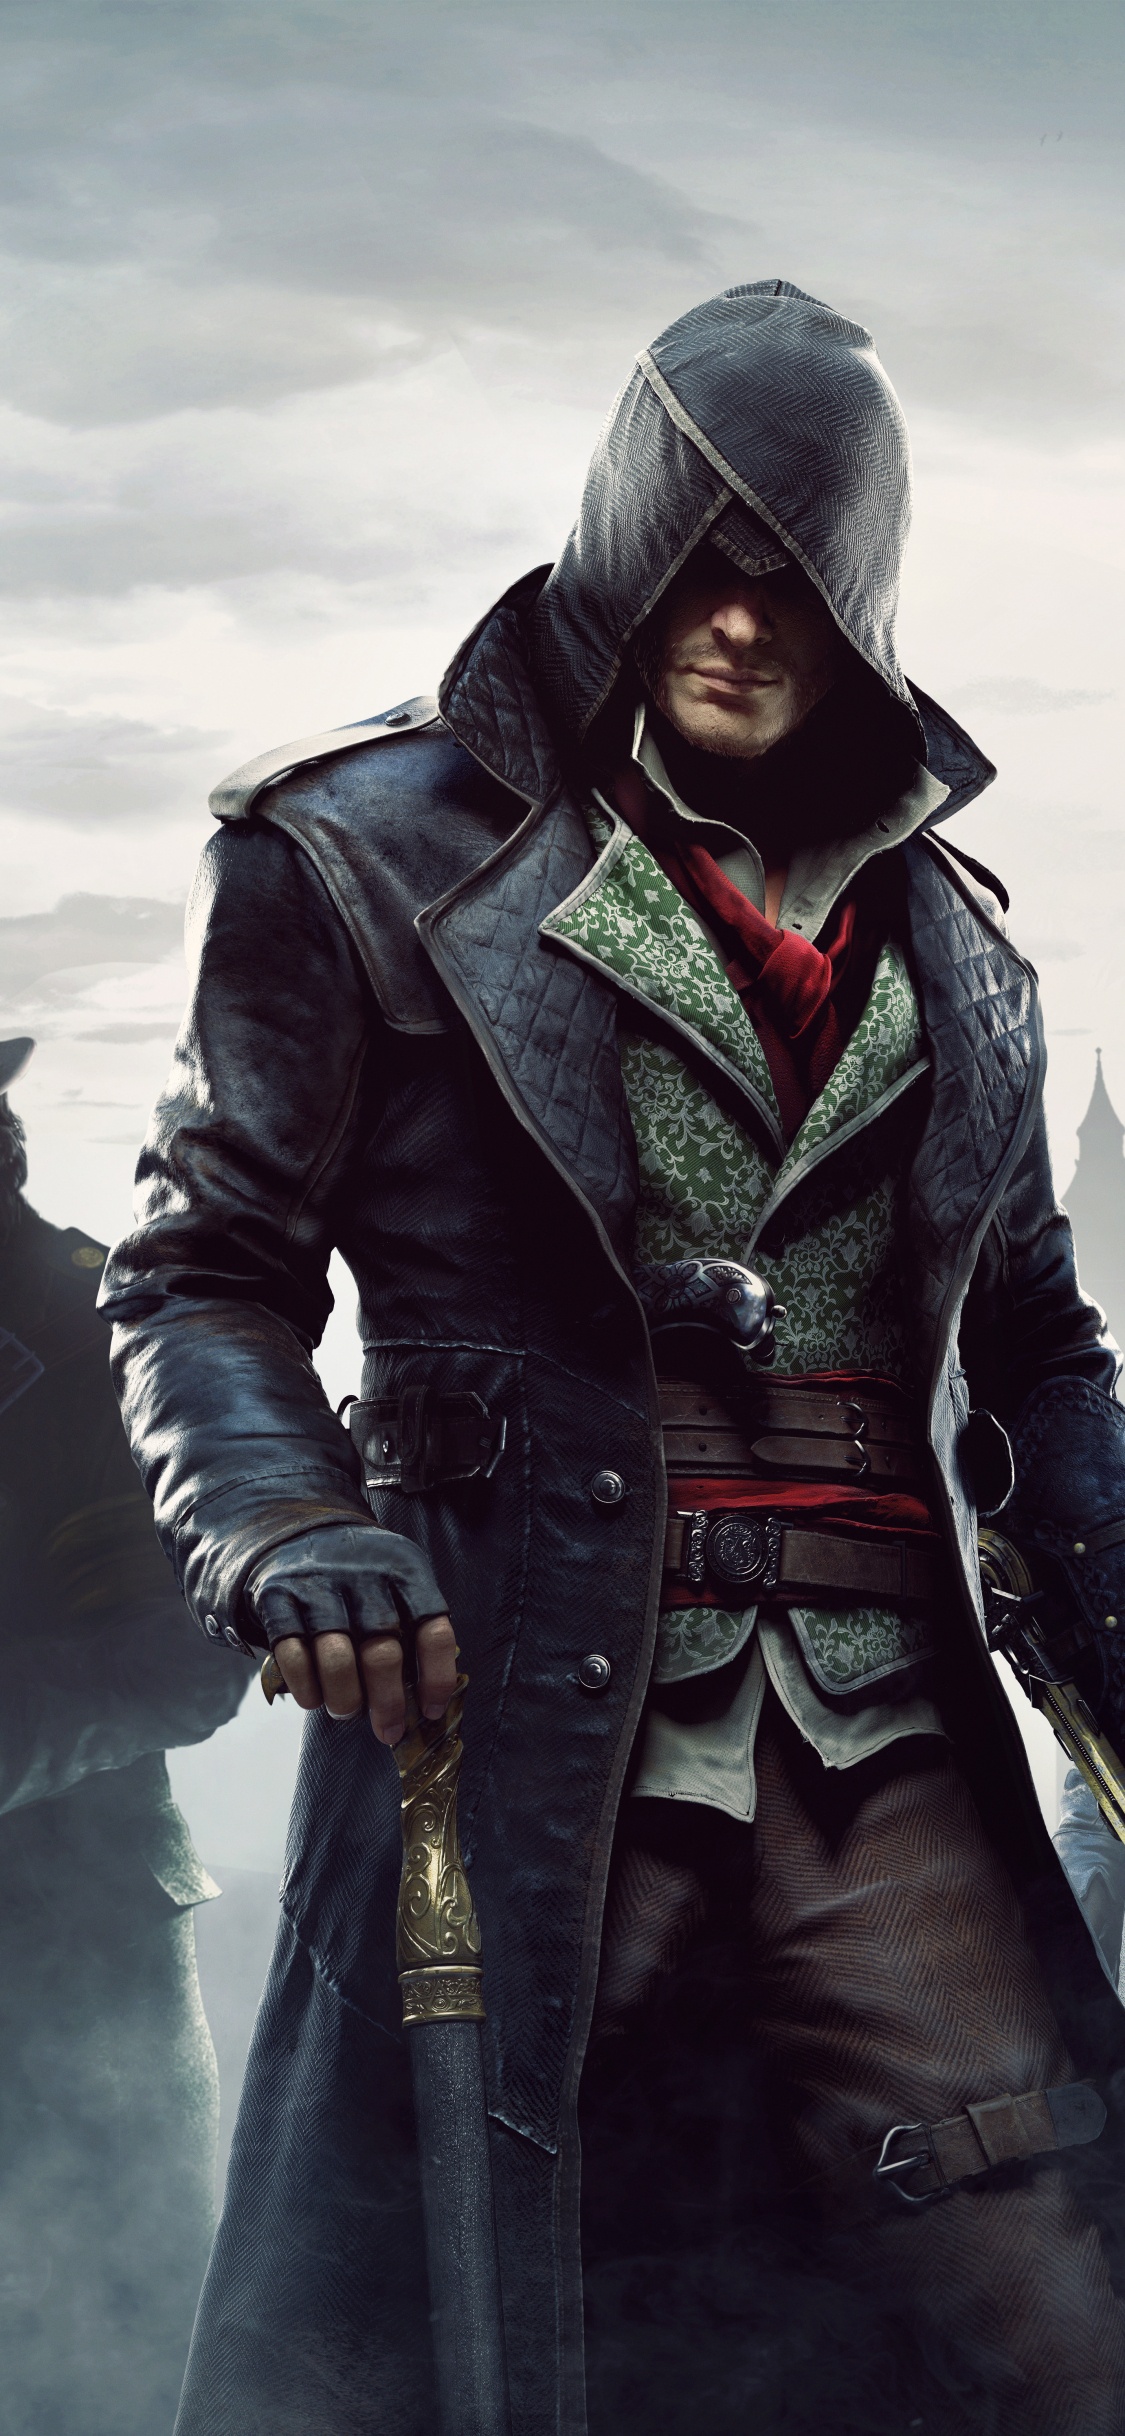 Assassins Creed Syndicate, Ubisoft, Pc-Spiel, Film, Assassins Creed Unity. Wallpaper in 1125x2436 Resolution